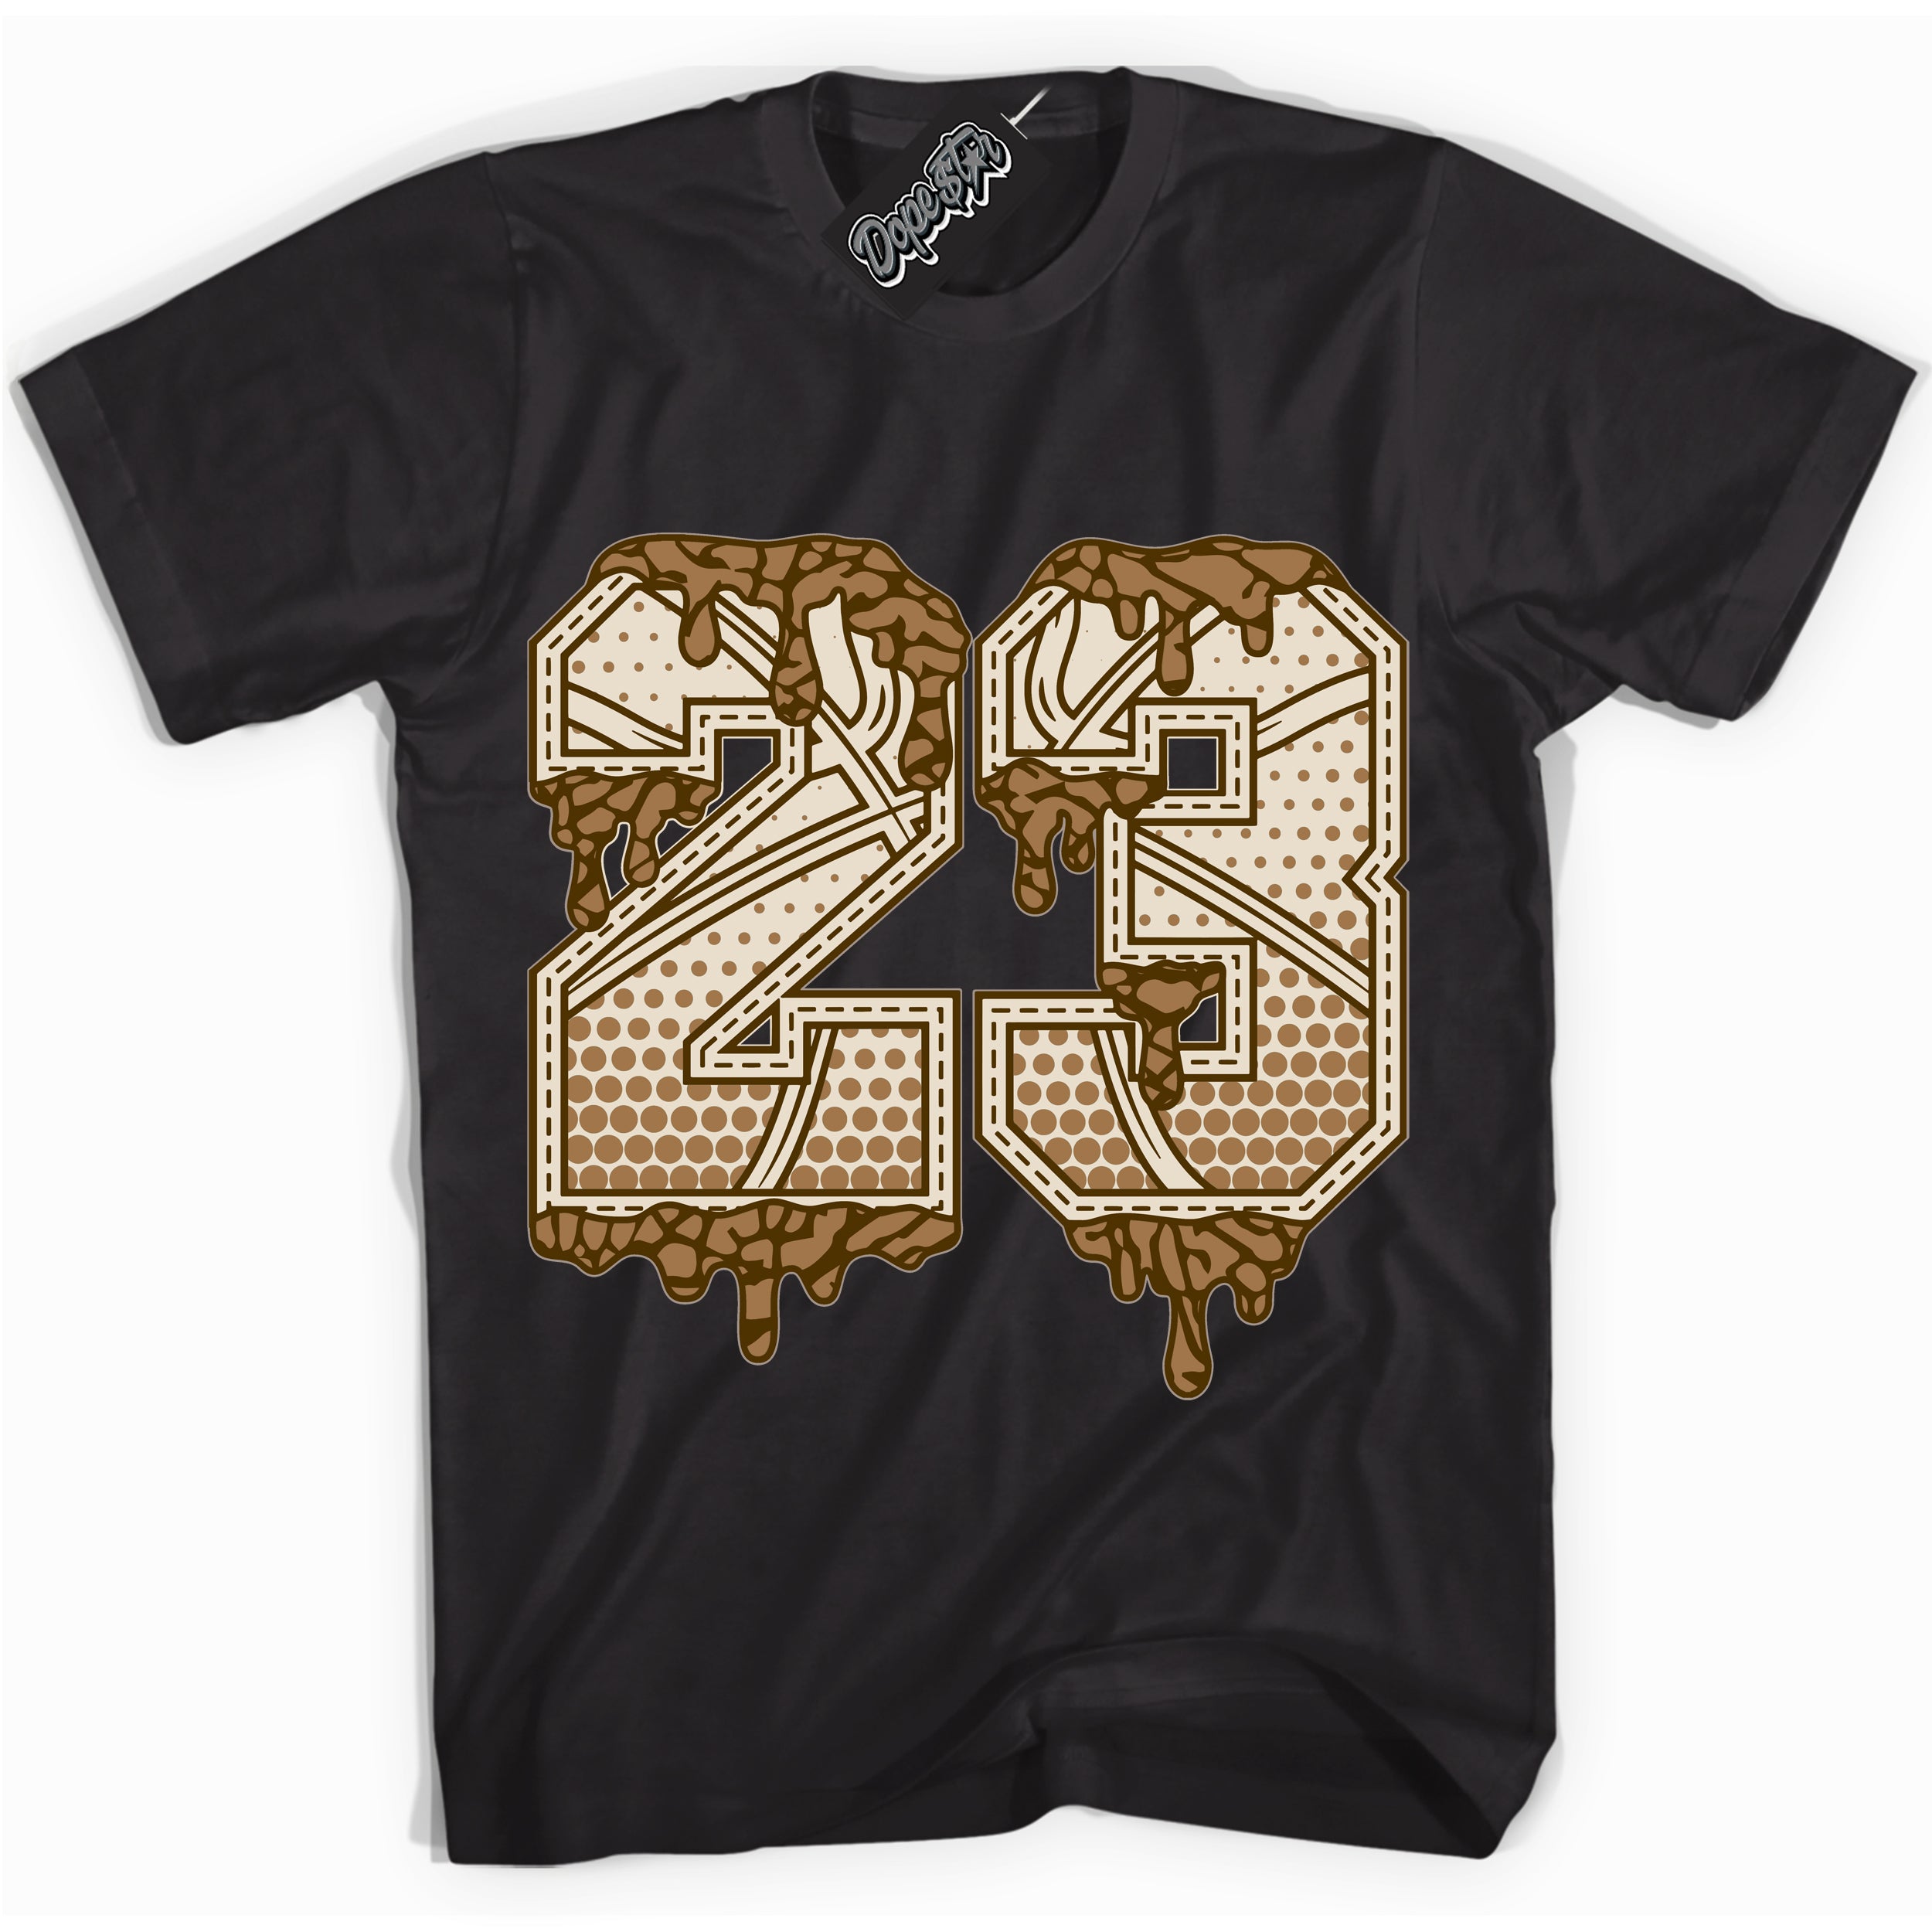 Cool Black graphic tee with “ 23 Ball ” design, that perfectly matches Palomino 3s sneakers 